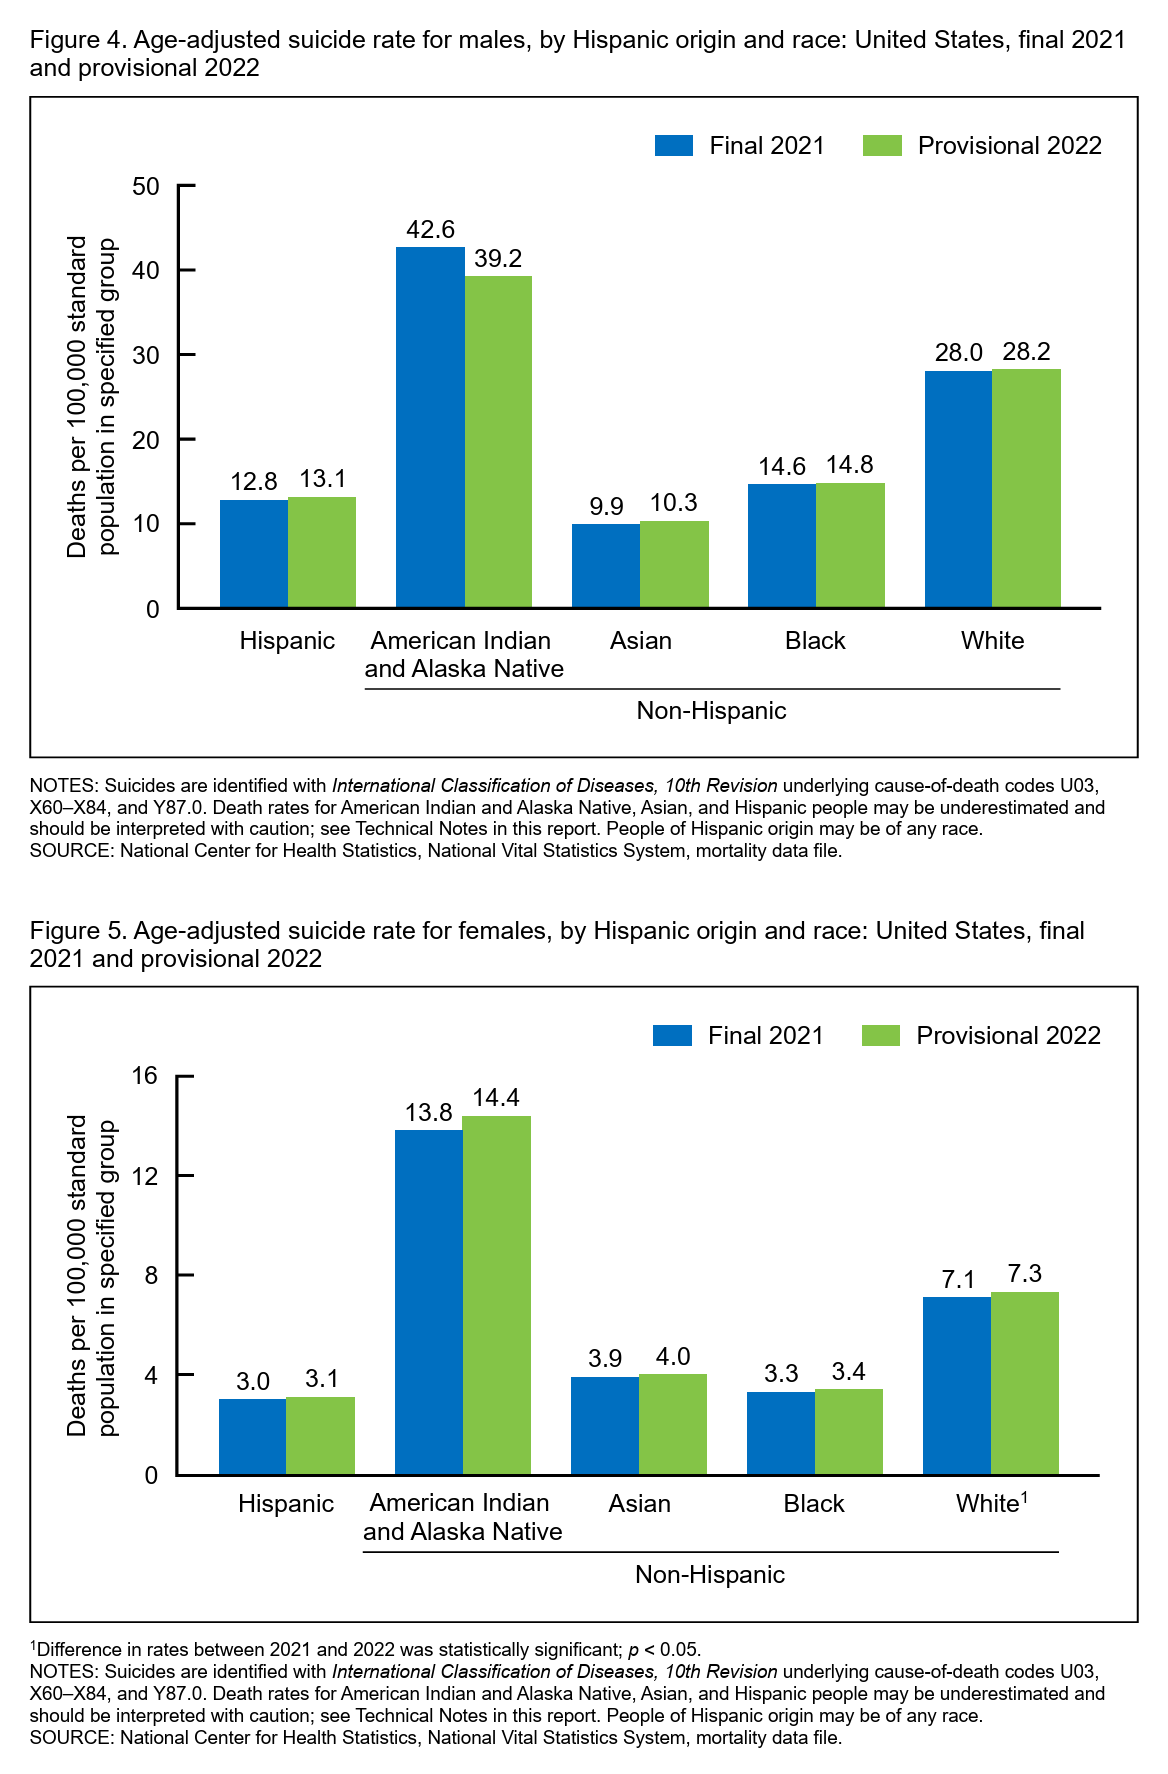 Age-adjusted suicide rate for men and women, by Hispanic origin and race: United States, final 2021 and provisional 2022. Data: National Center for Health Statistics, National Vital Statistics System, mortality data file. Graphic: Curtin, et al., 2023 / NVSS/ CDC